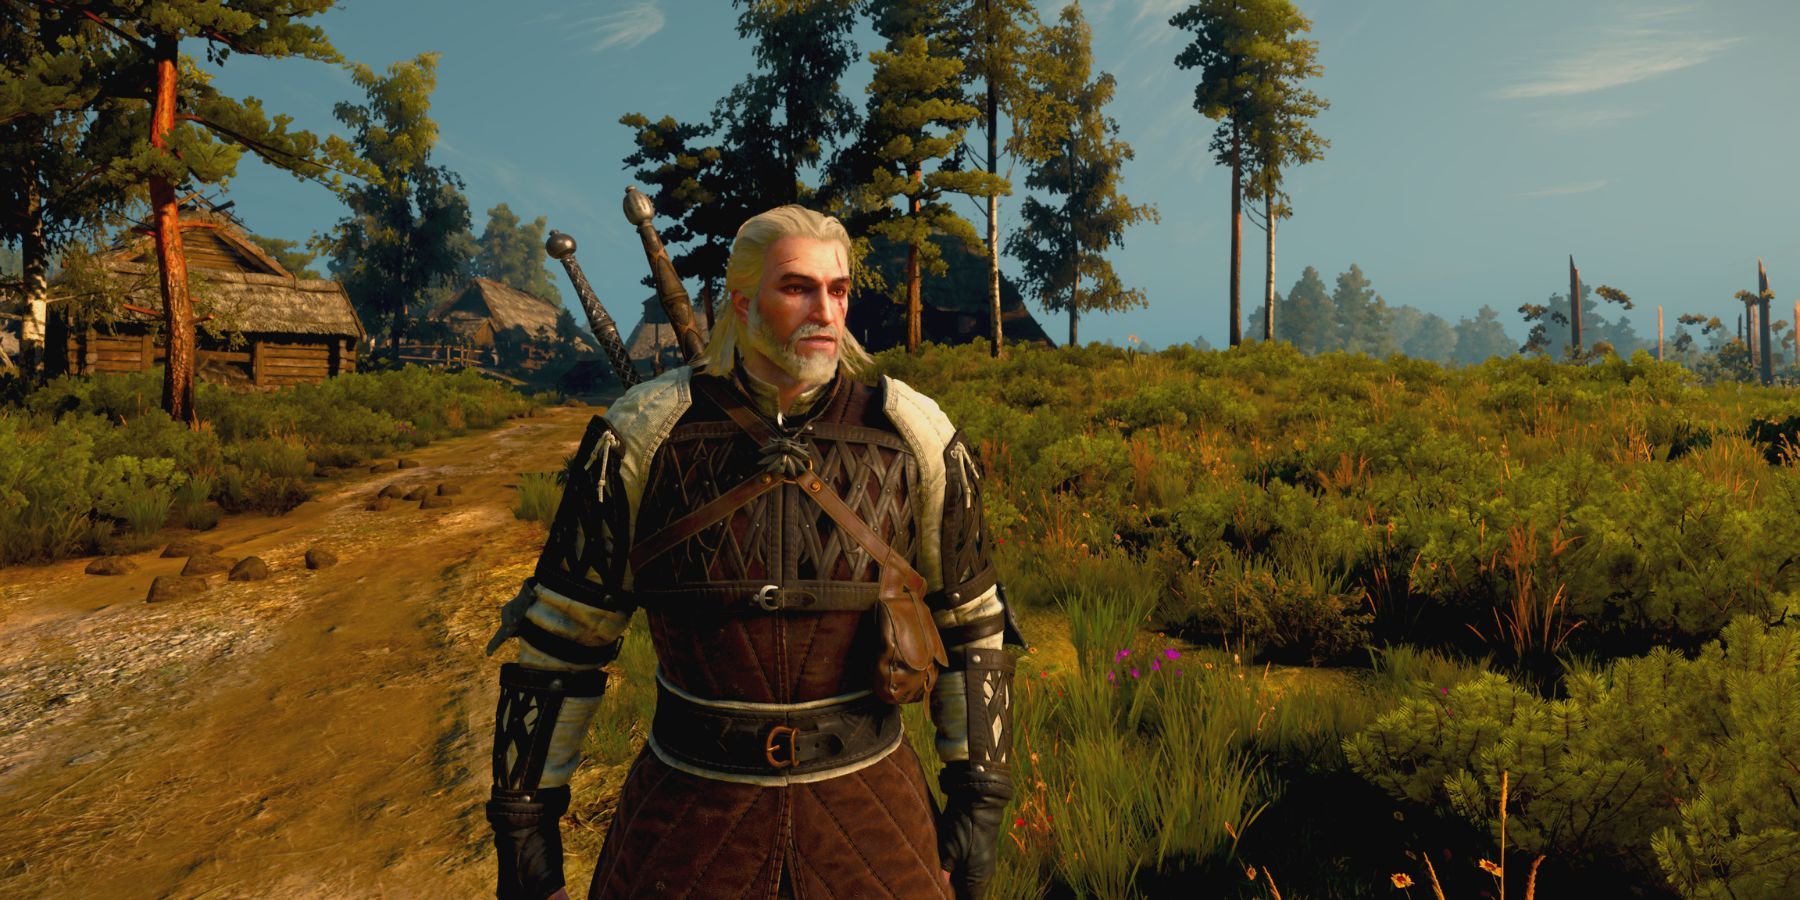 3 New Witcher Games Announced! Including a Multiplayer One. (My